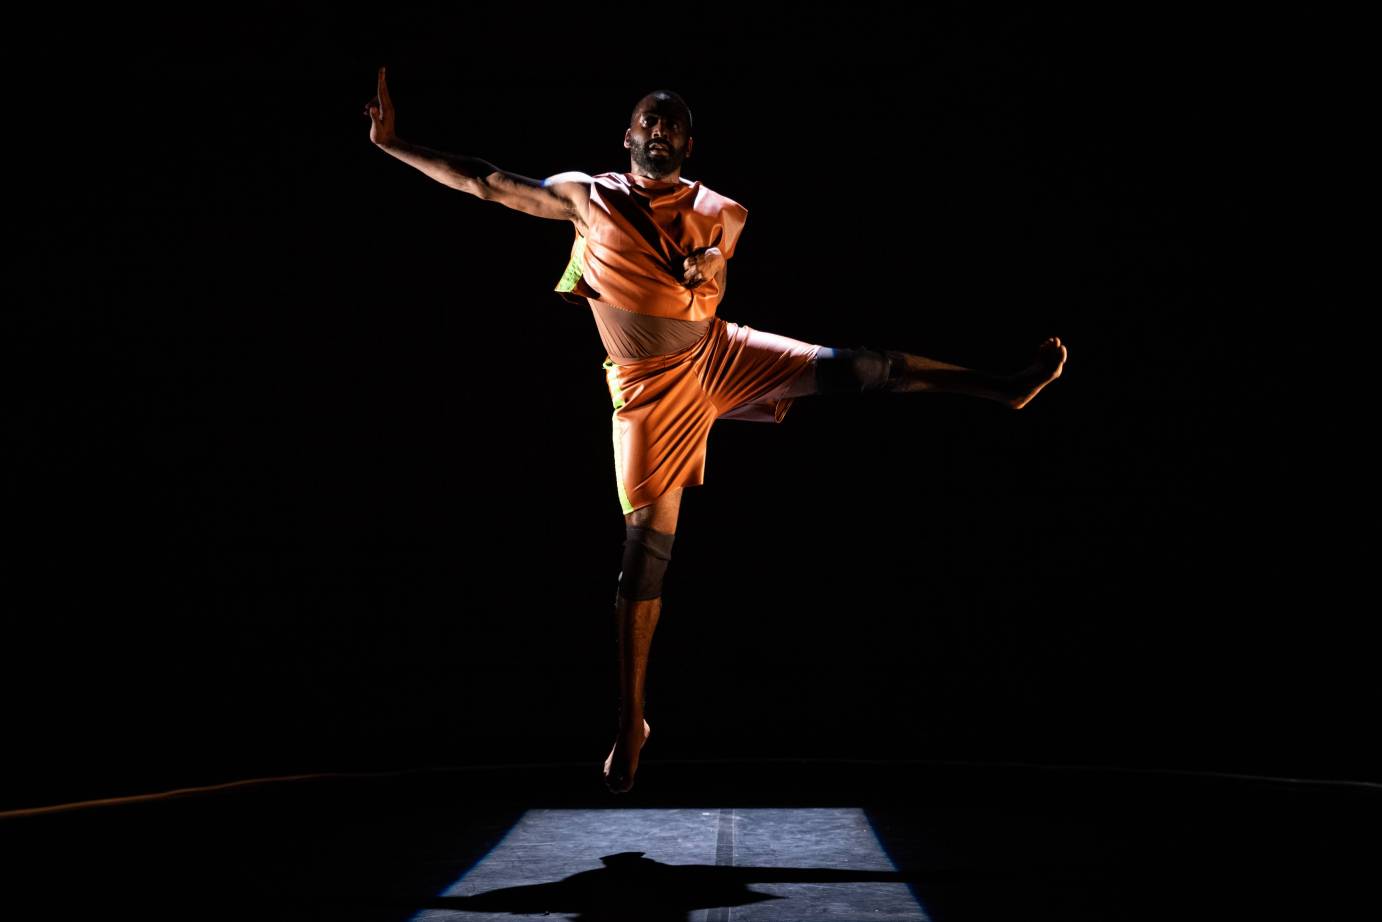 against a black background dancer Jerron Herman, a black man in an orange midriff top and shorts, jumps into the air with one are lifted to his side and the other immobile because of his disability. He is jumping in the air with one leg kicked to the side. 